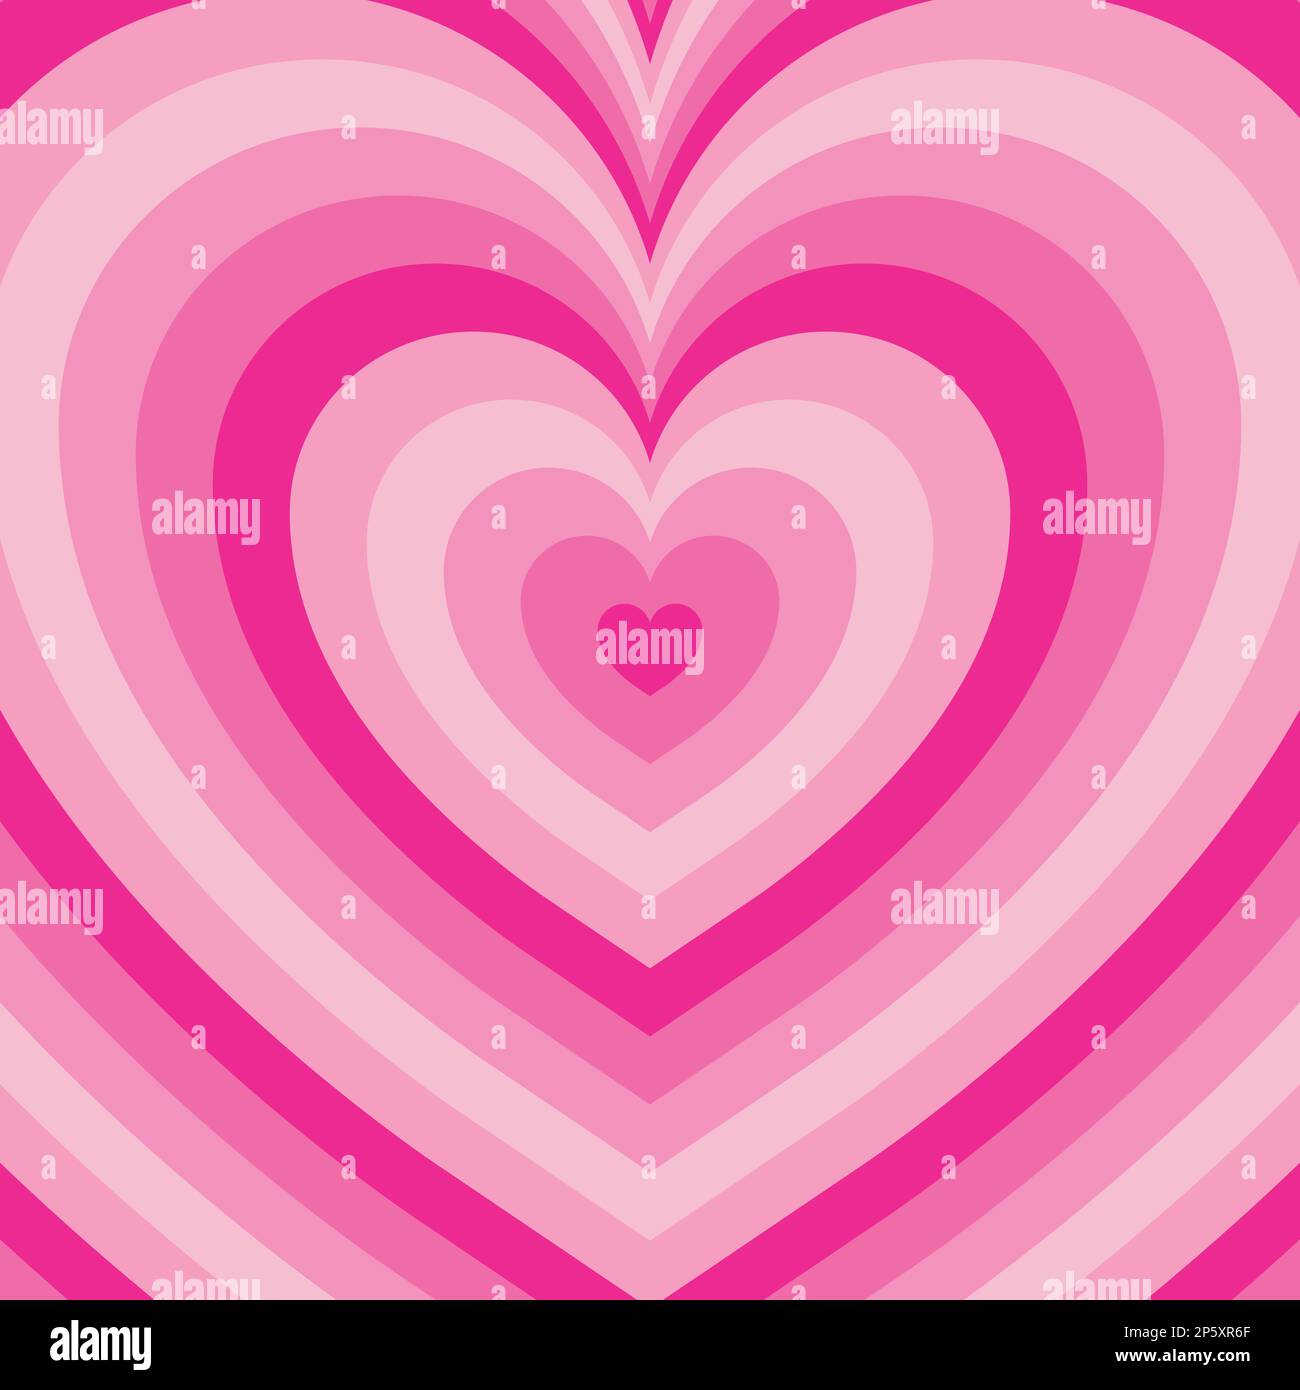 Pink heart background in retro style. Love wallpaper design Stock ...